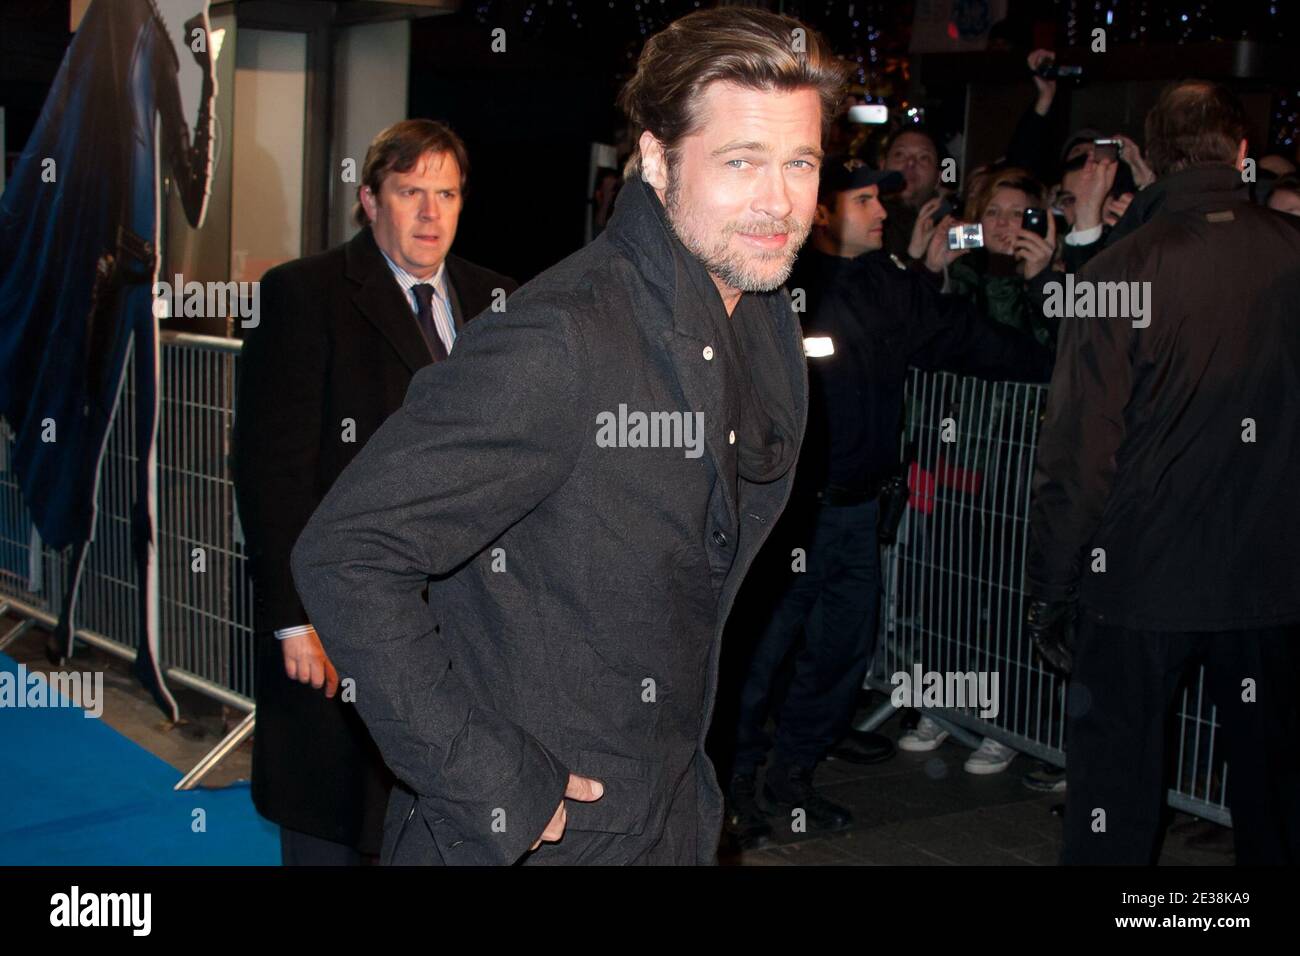 Brad Pitt arriving for the France premiere of animation film 'Megamind' at the UGC Normandie theatre in Paris, France on November 29, 2010. Photo by Nicolas Genin/ABACAPRESS/COM Stock Photo